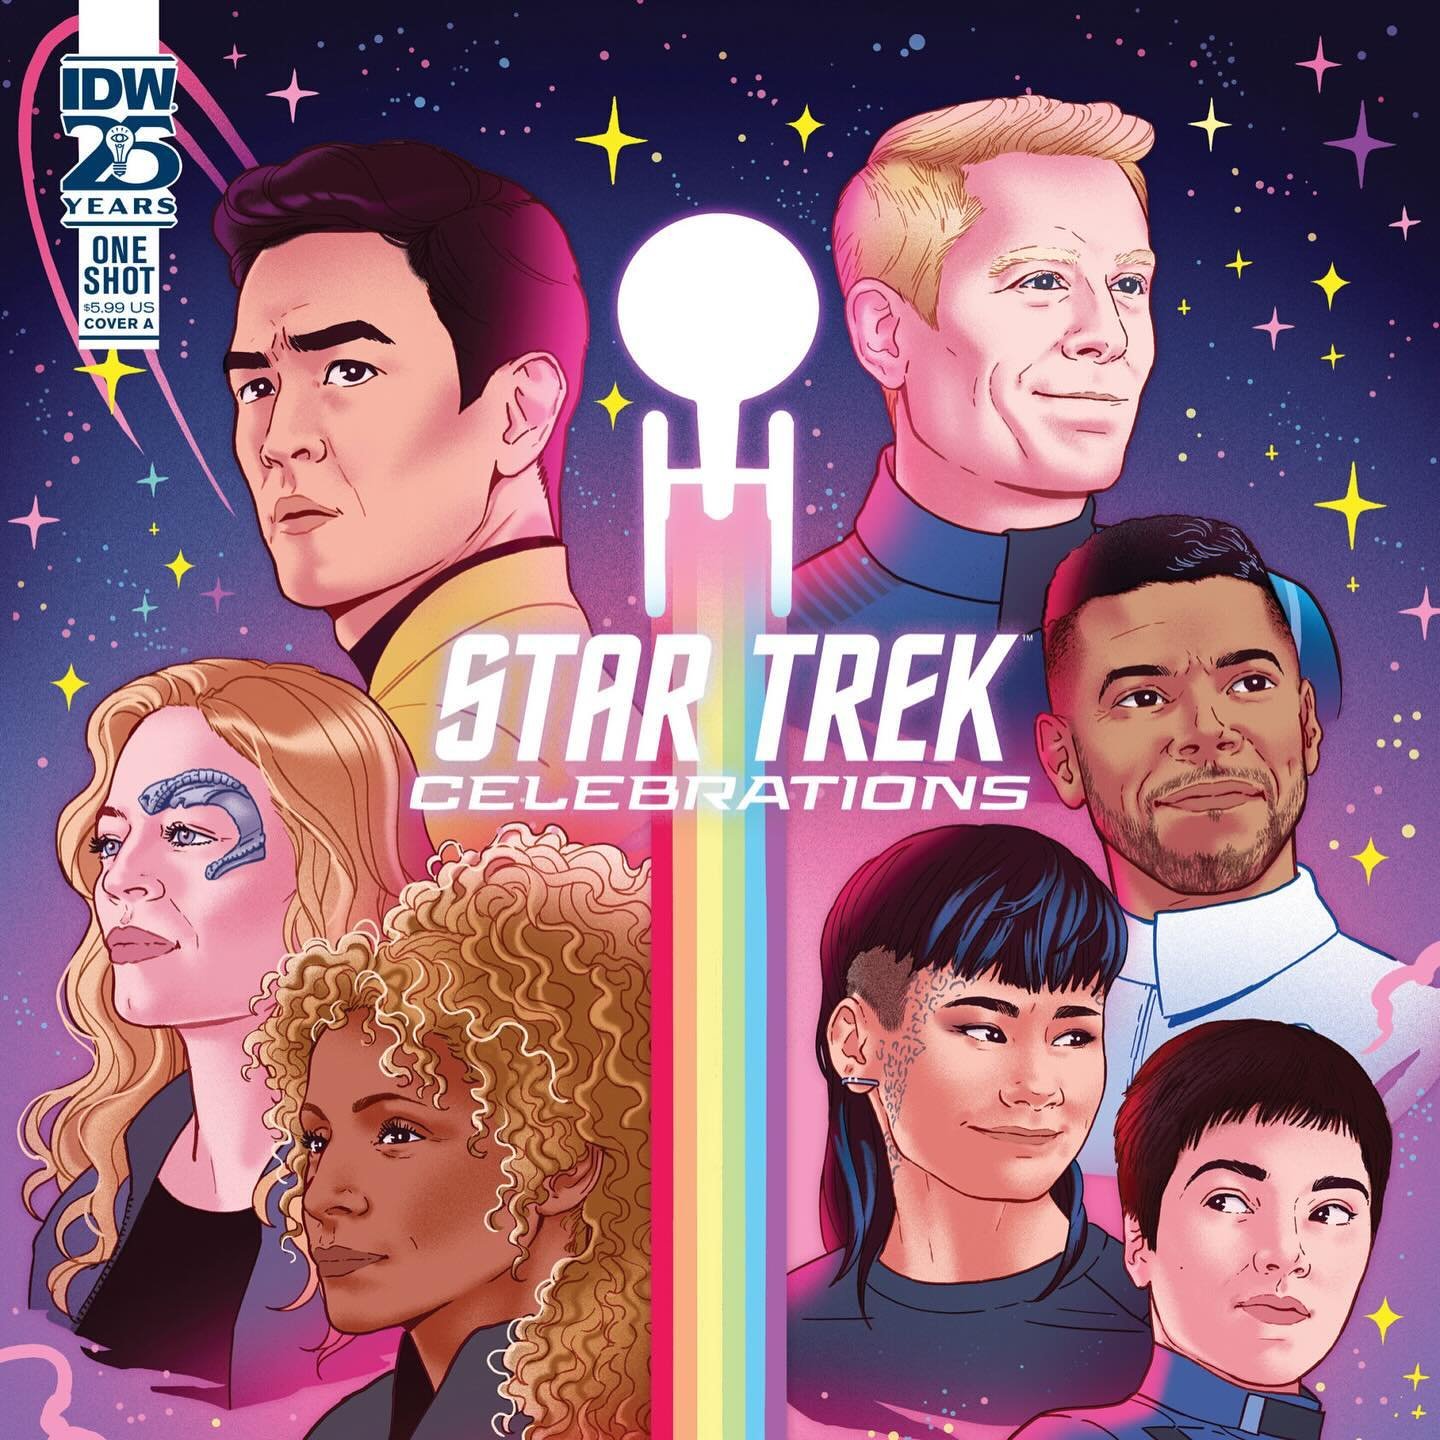 Hope you all have a good weekend! 
Just a reminder to preorder the Star Trek celebrations one shot with your local comic shop!